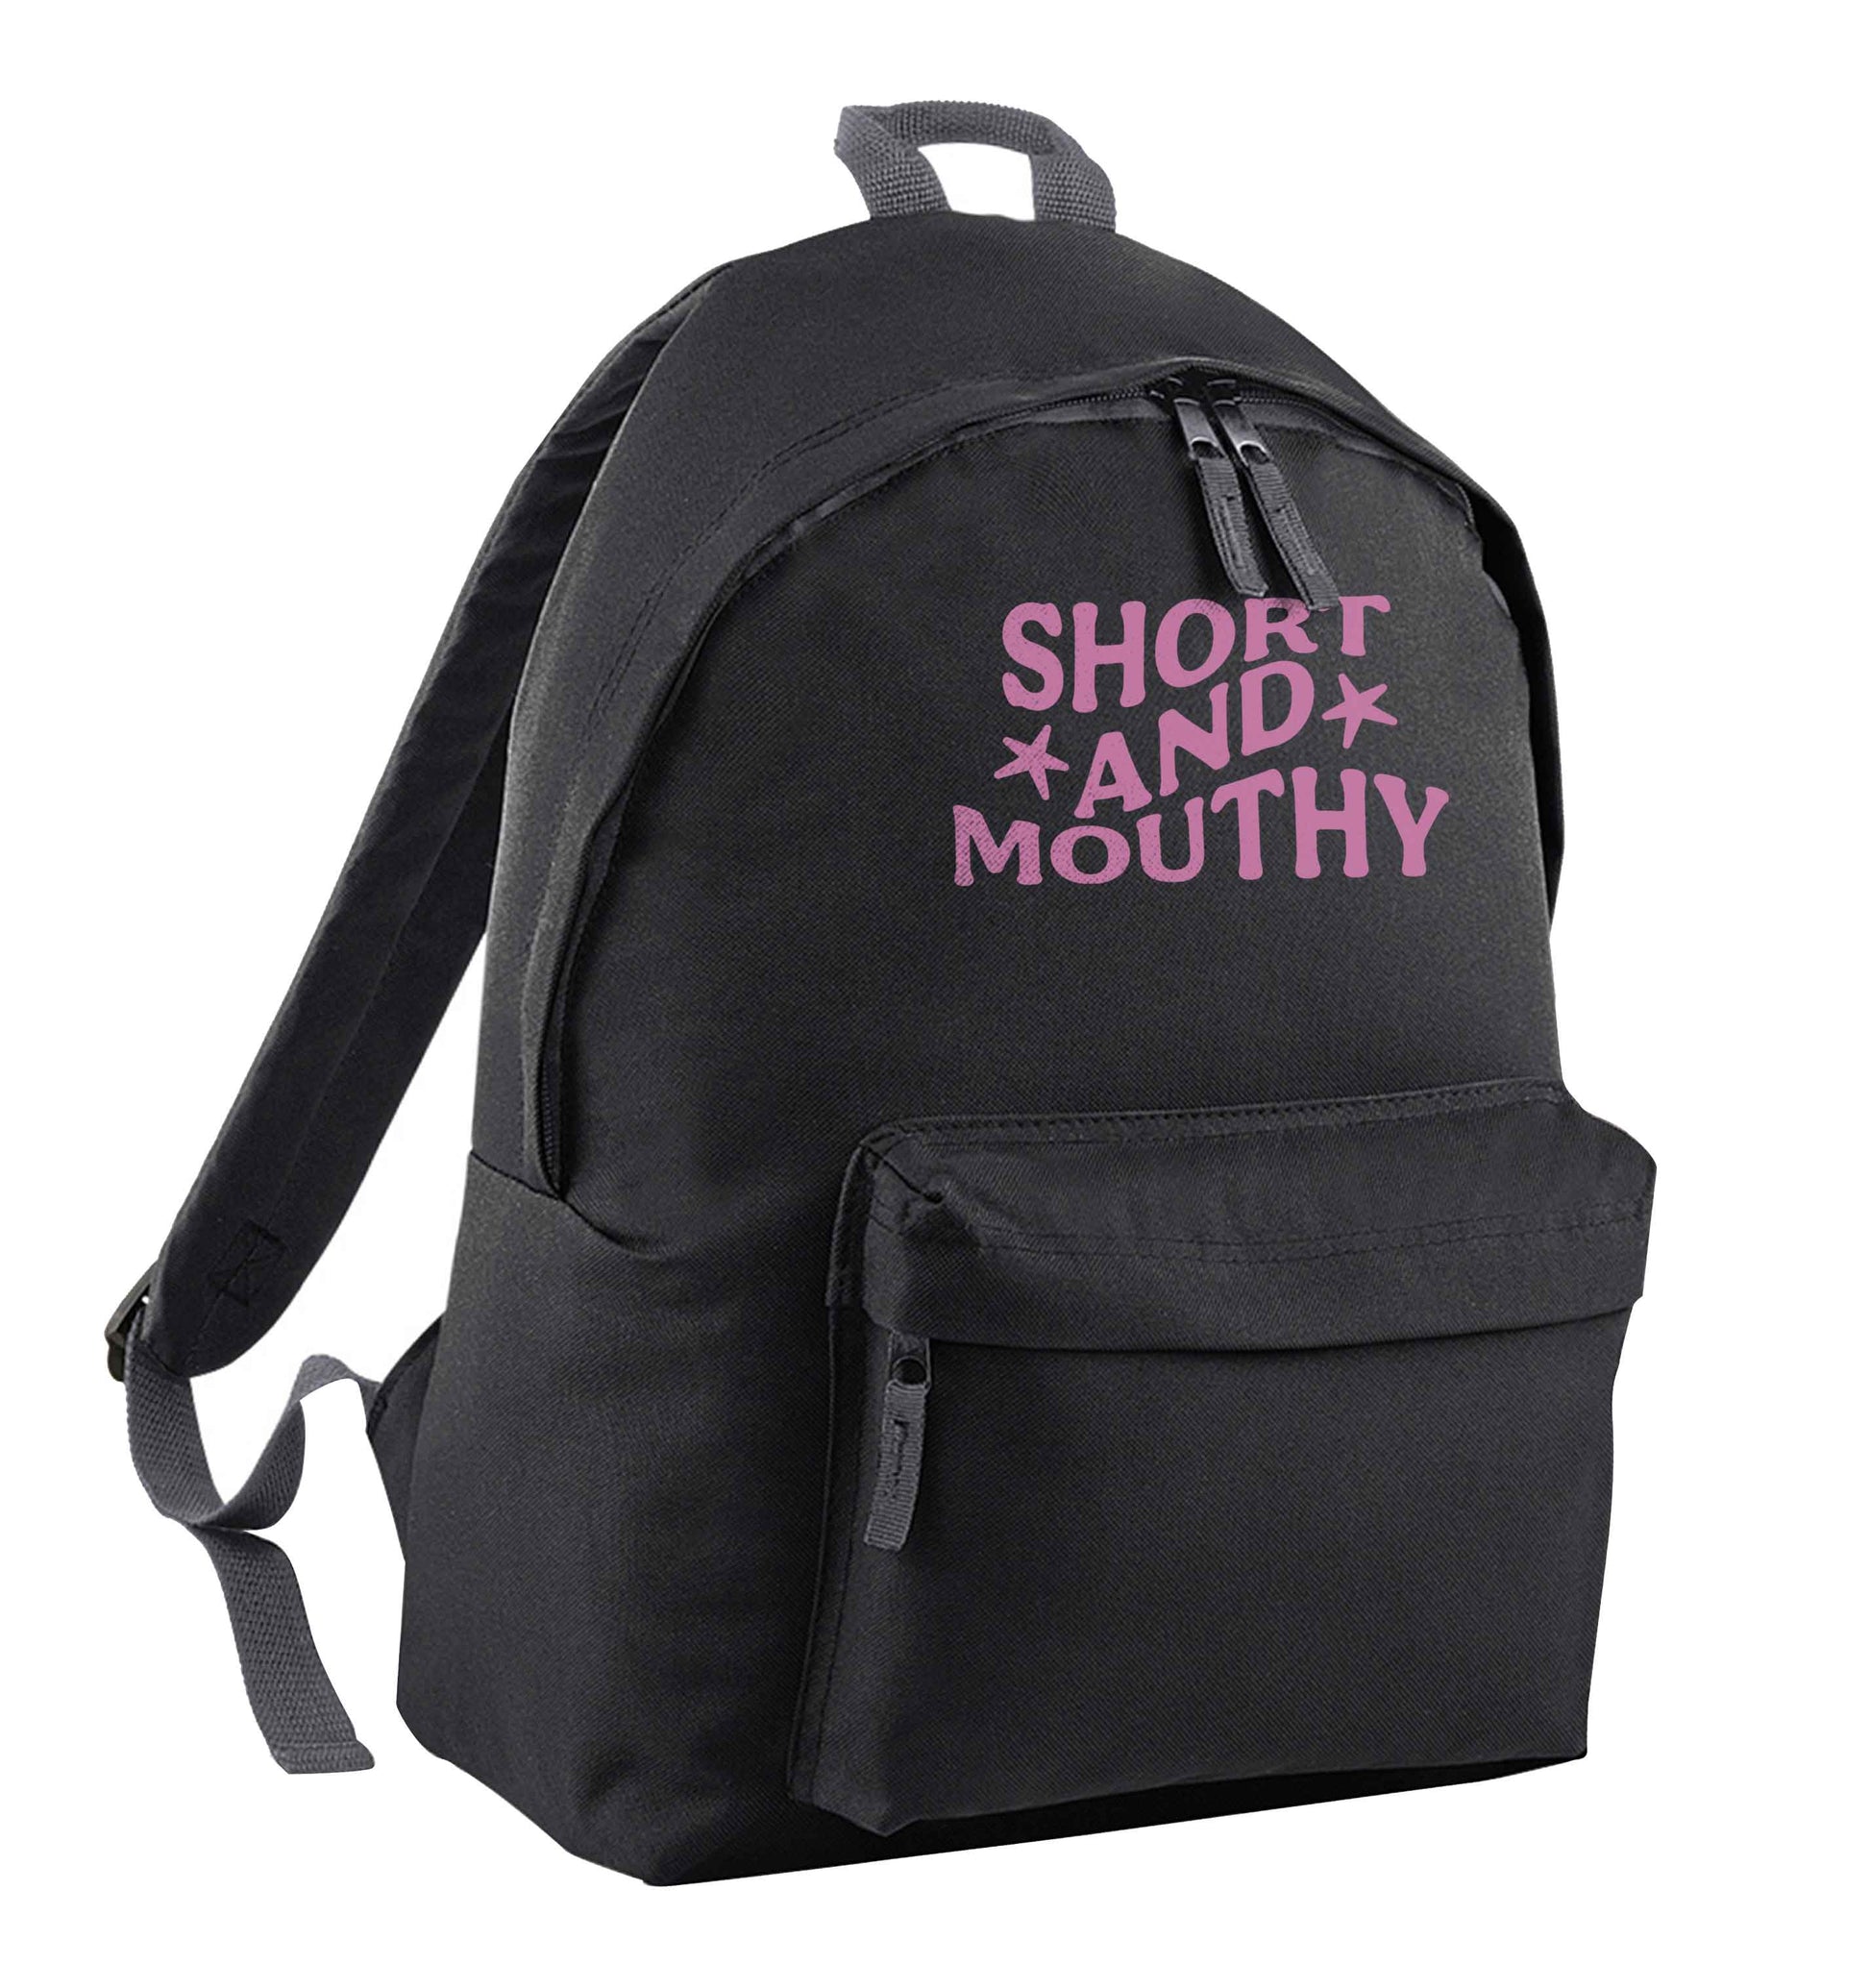 Short and mouthy black adults backpack